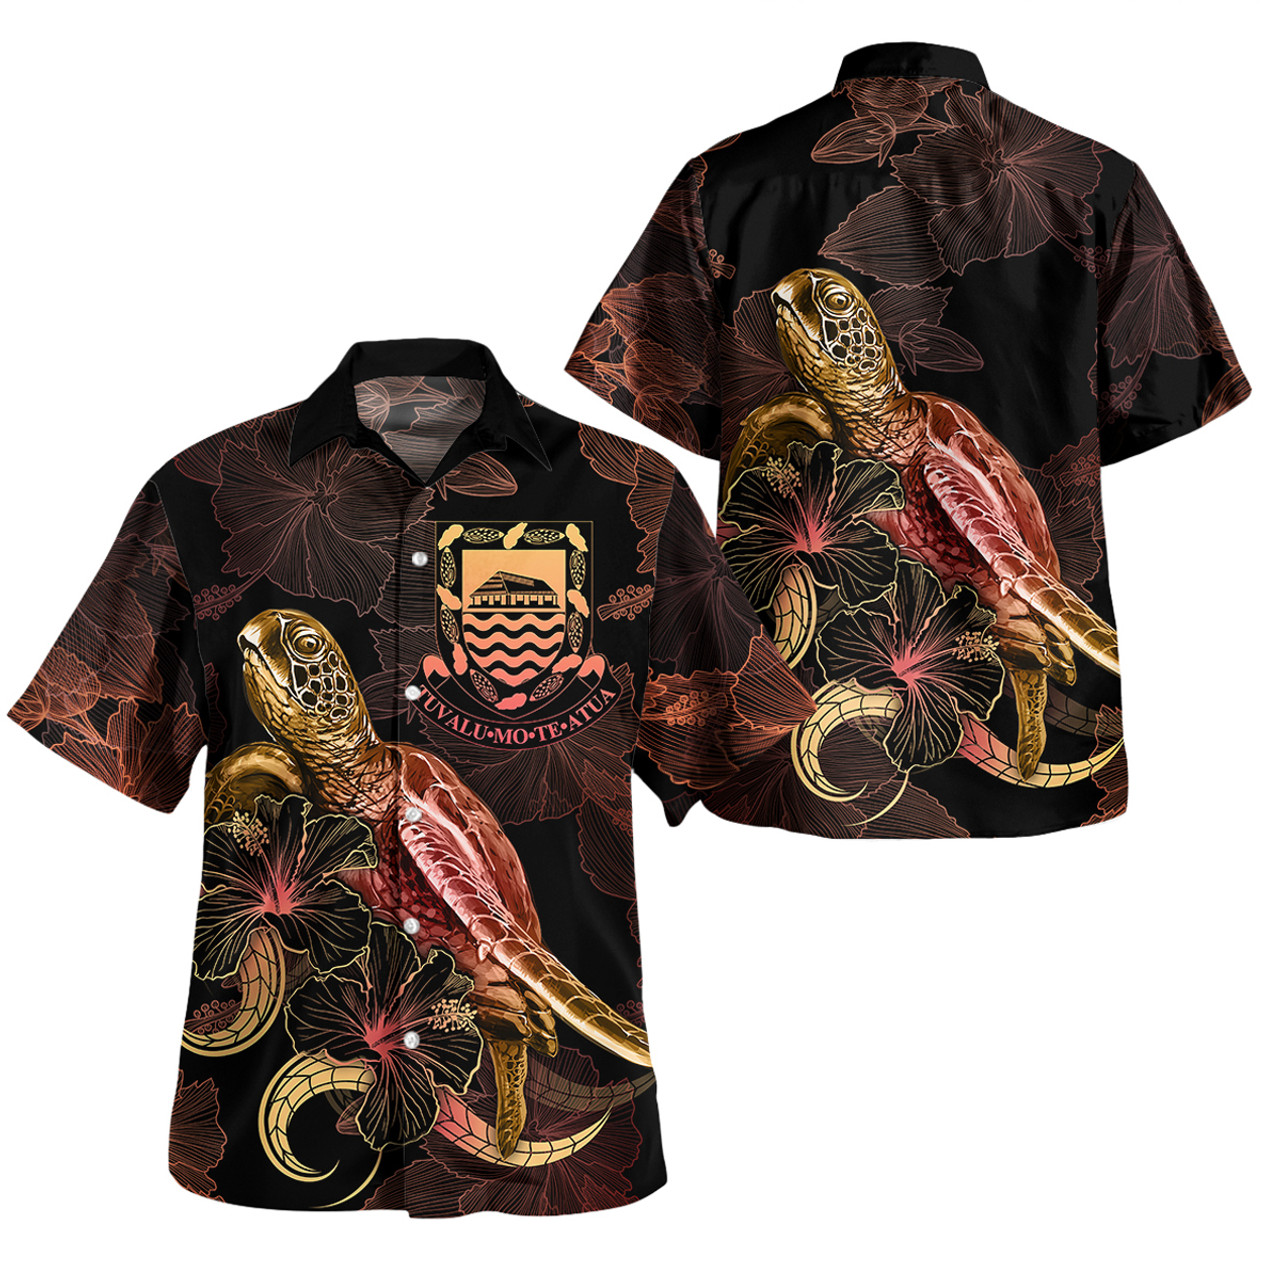 Tuvalu Short Sleeve Shirt - Custom Tuvalu Coat Of Arms With Polynesian Turtle Blooming Hibiscus Gold